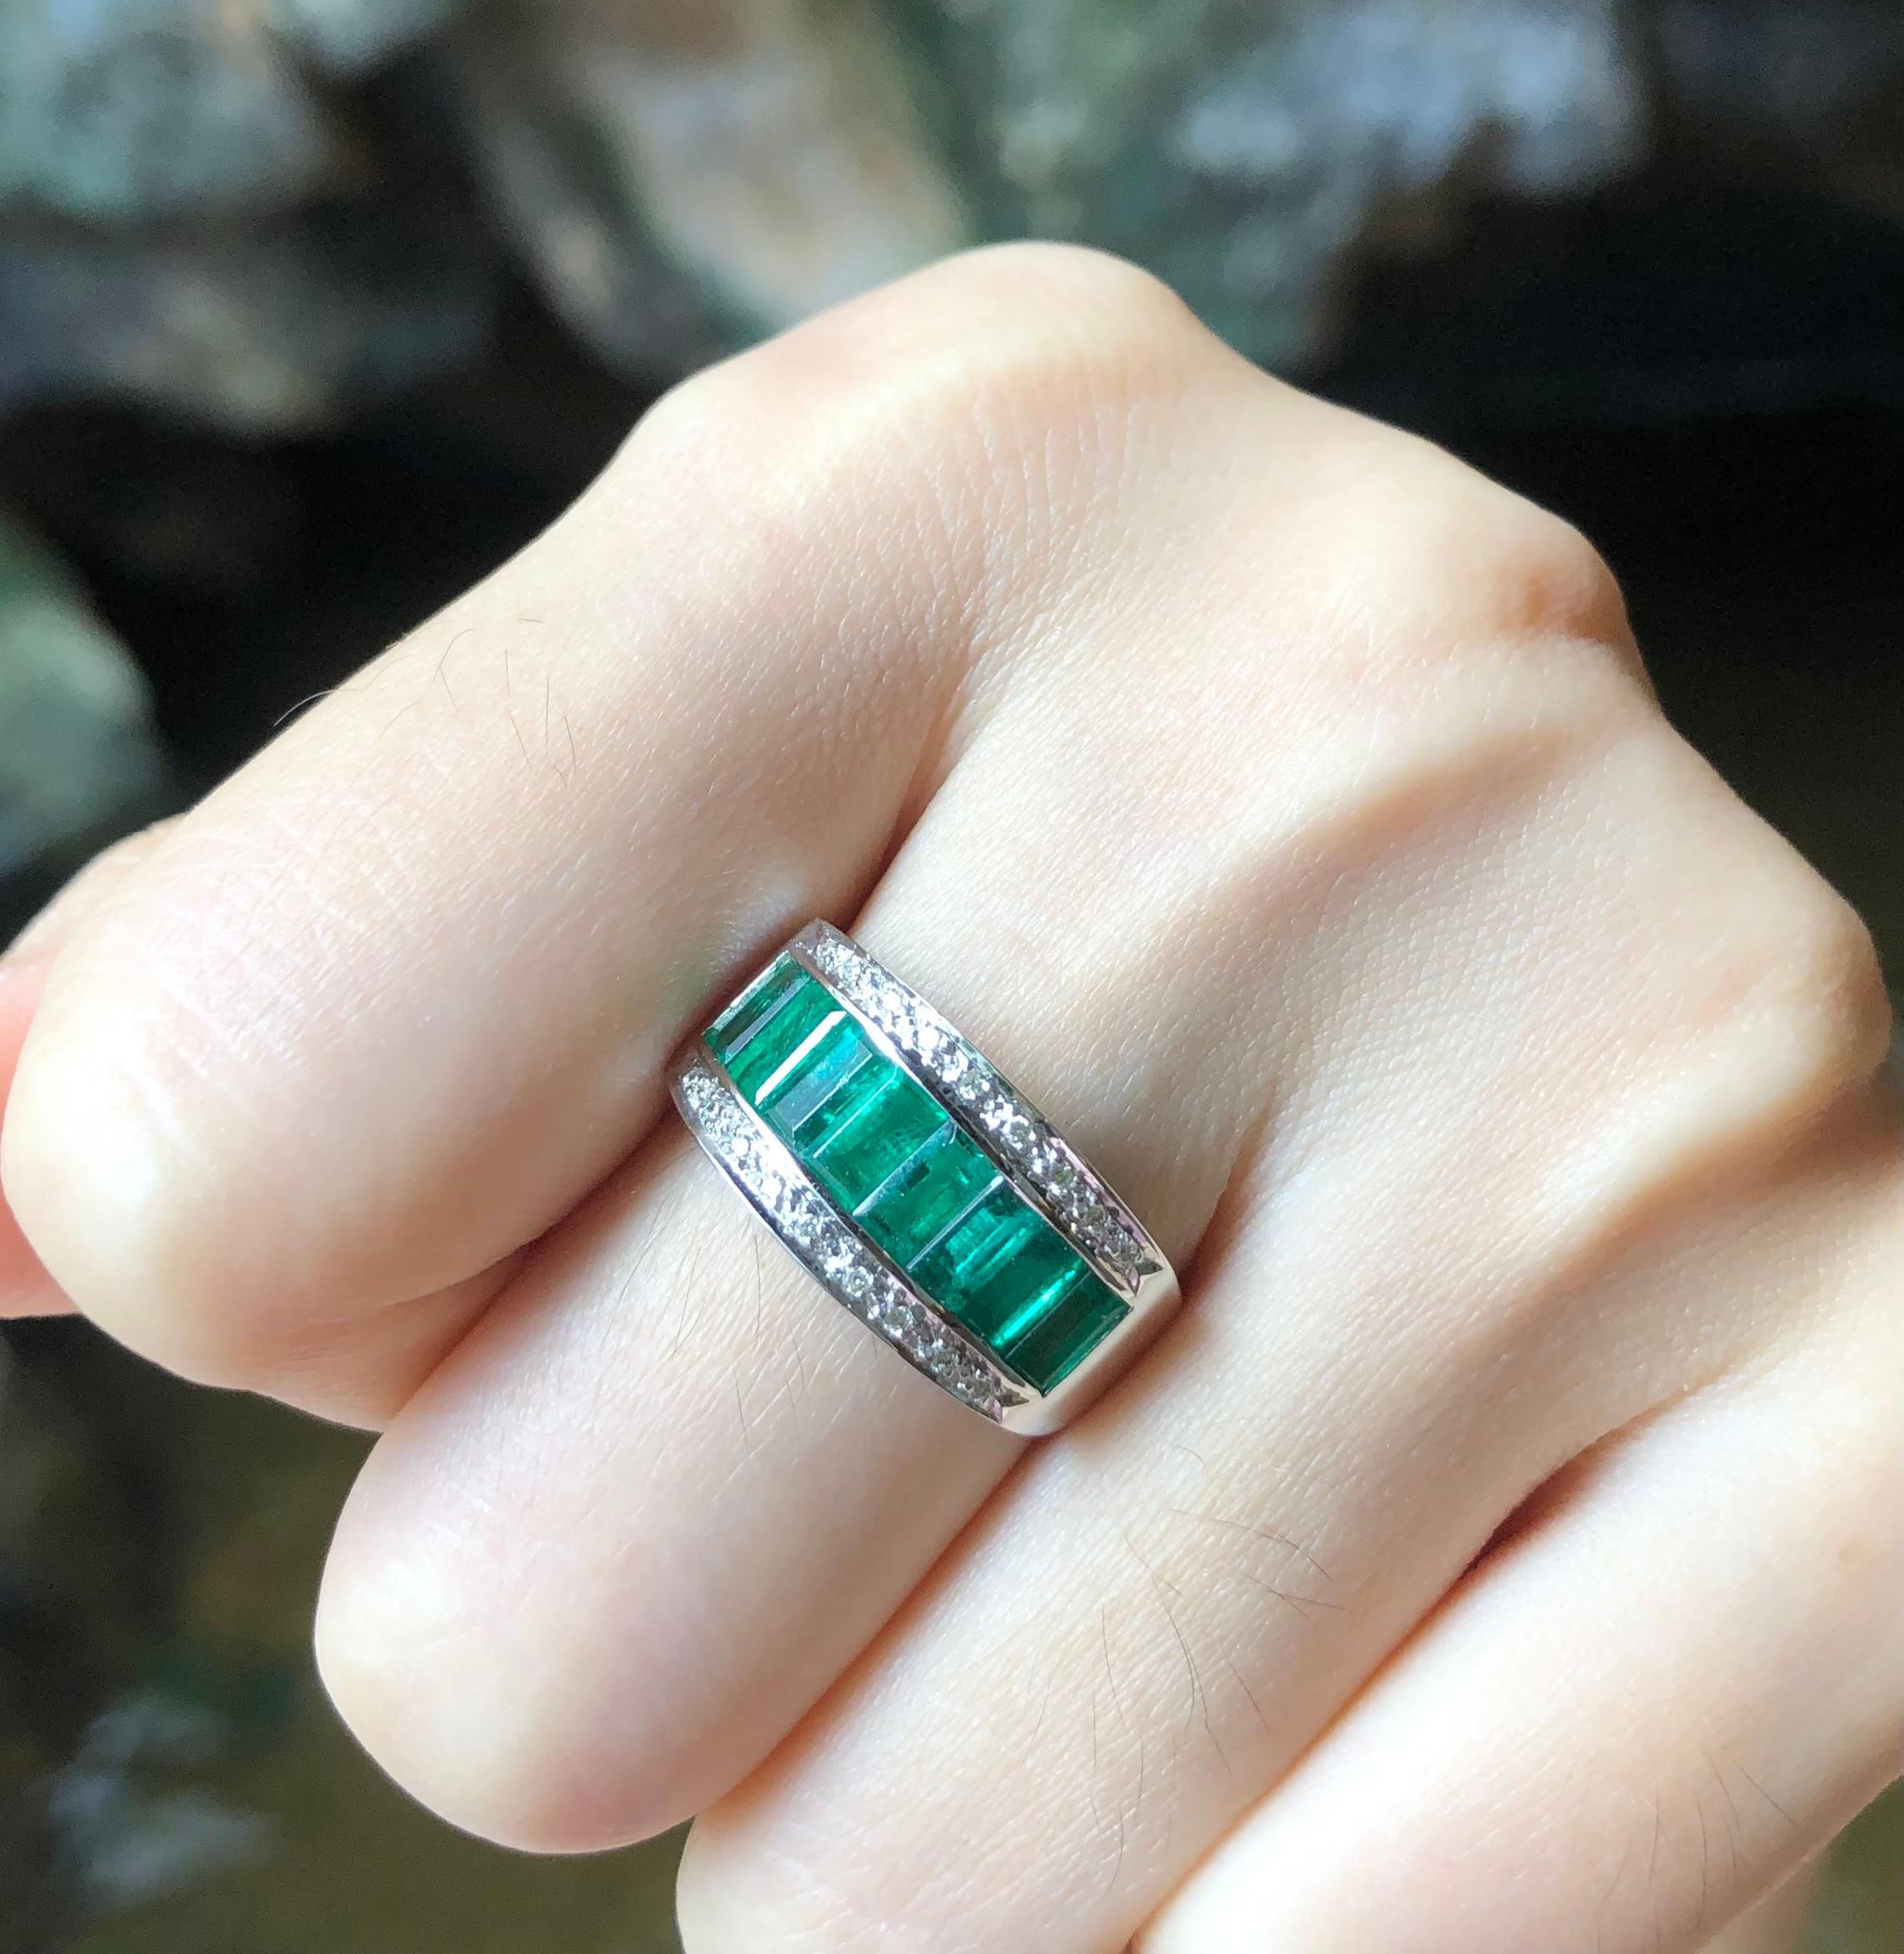 Emerald 1.79 carats with Diamond 0.08 carat Ring set in 18 Karat White Gold Settings

Width:  1.8 cm 
Length: 0.9 cm
Ring Size: 55
Total Weight: 4.79 grams

